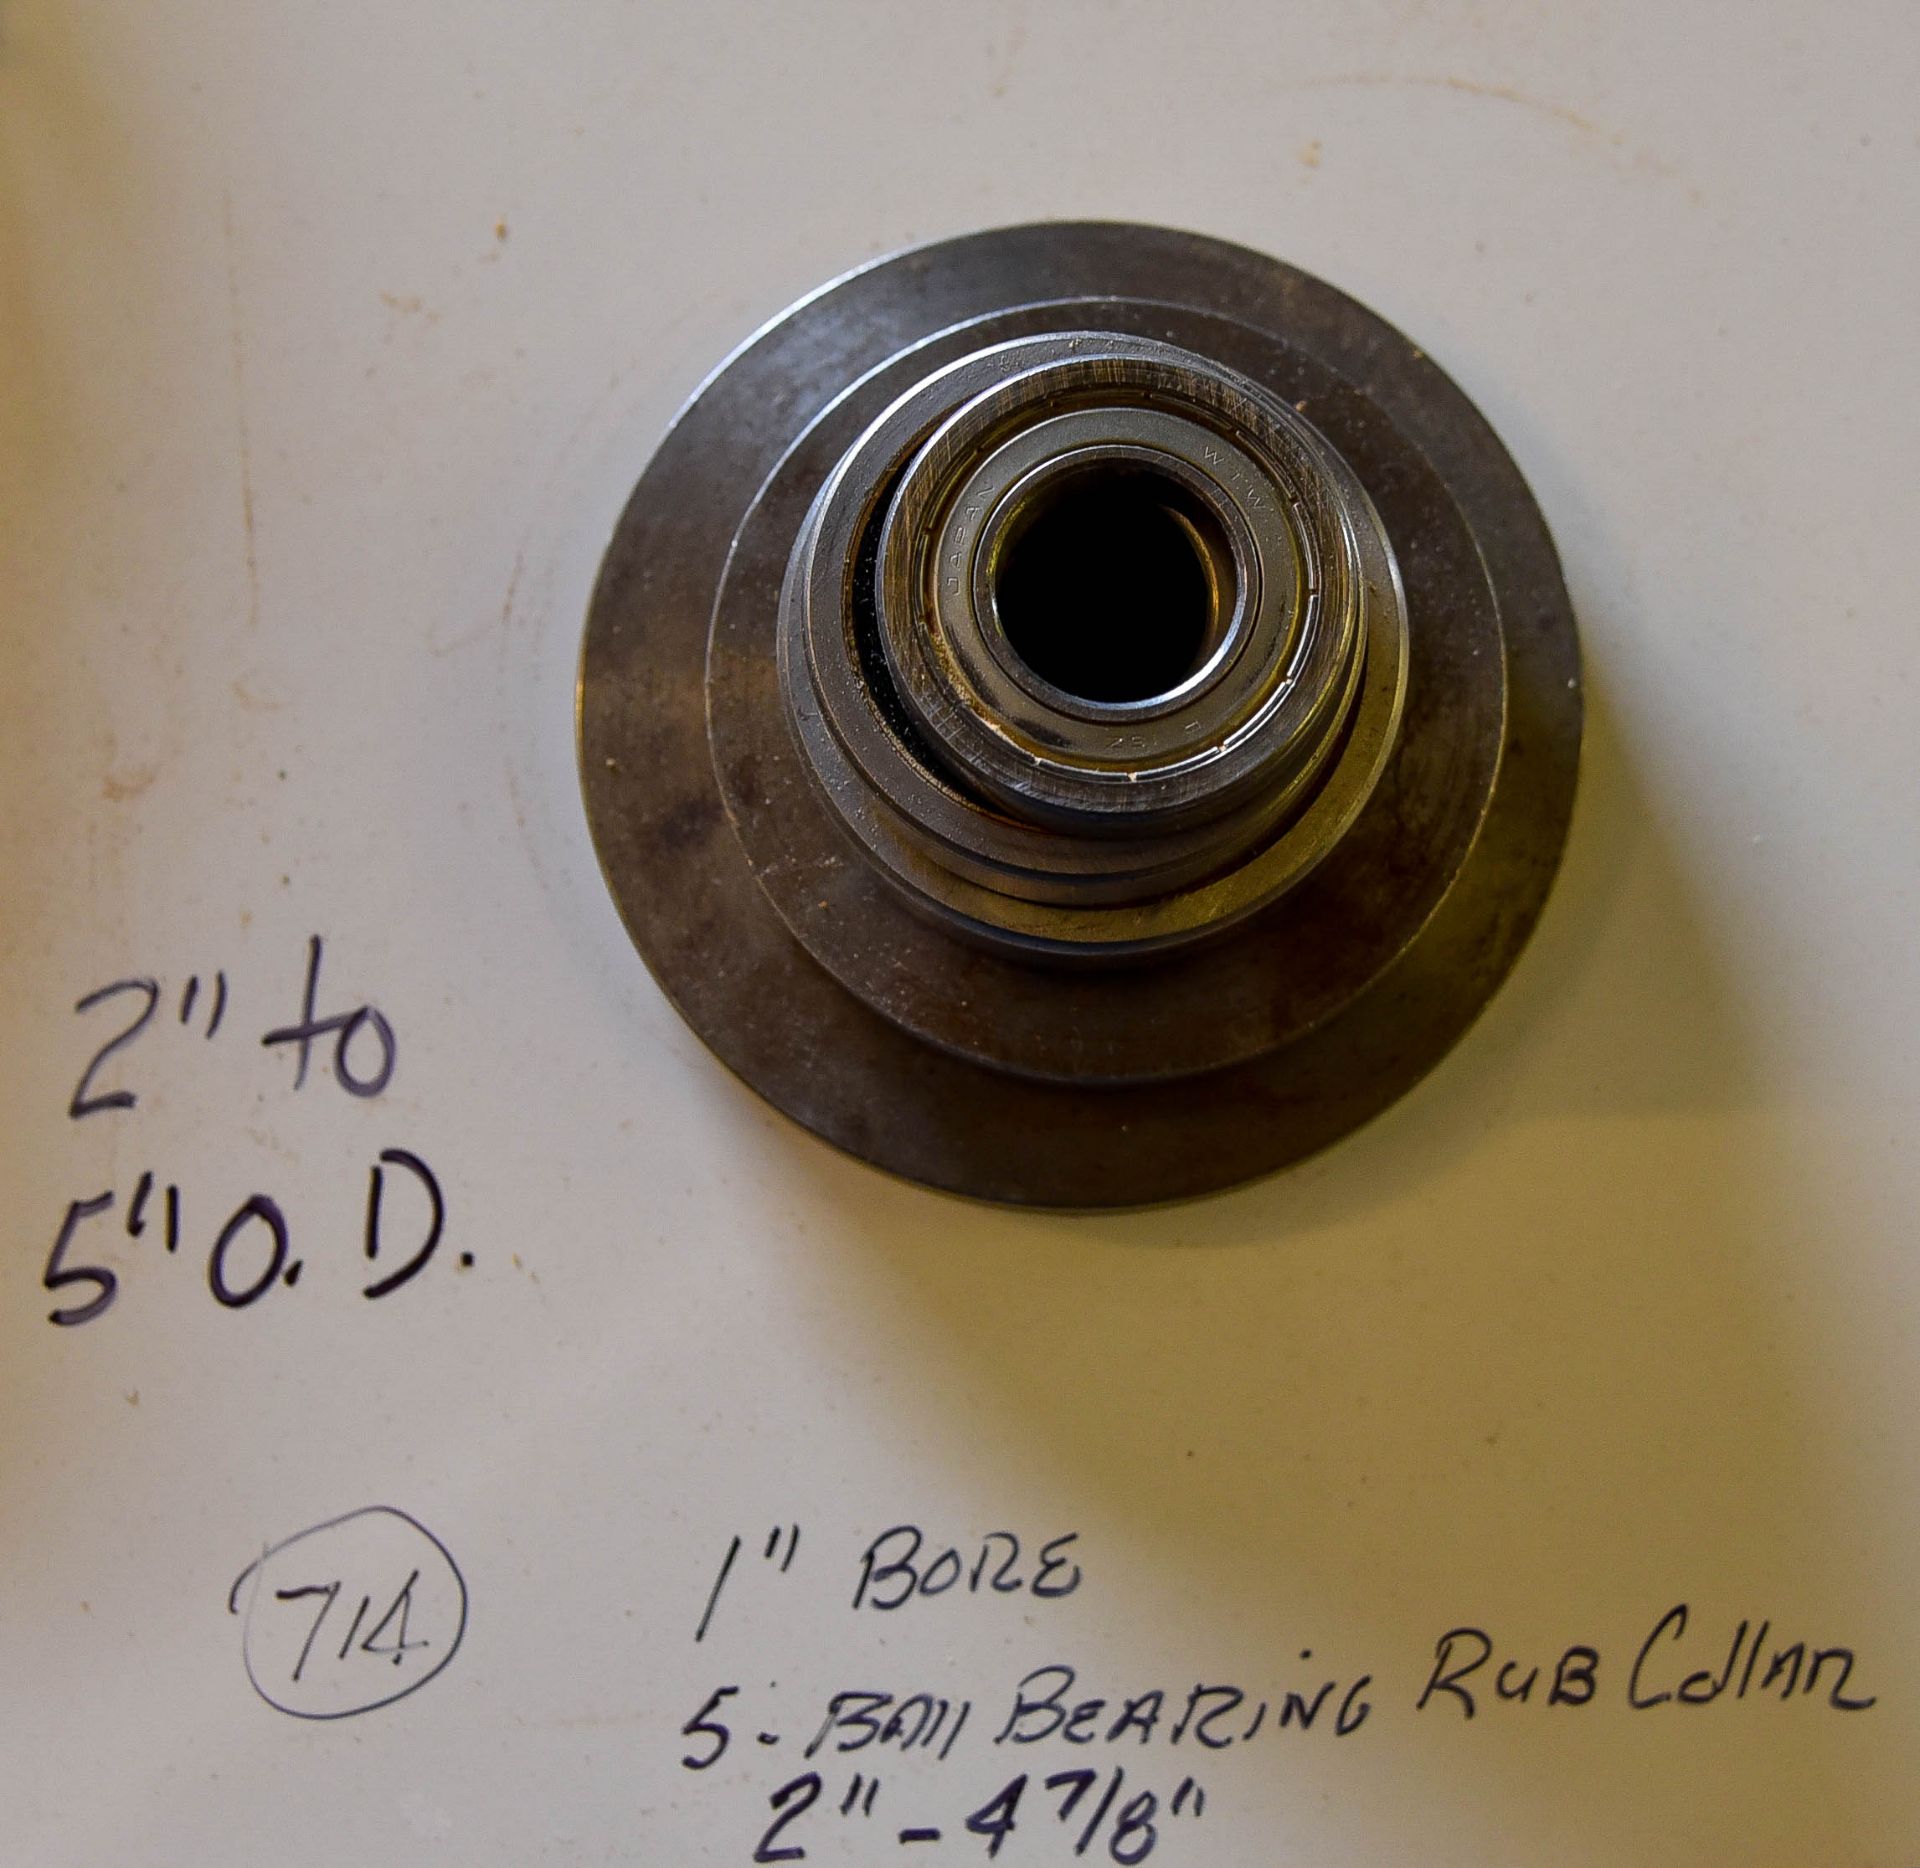 5 Ball Bearing Rub Collars, 2" - 4-7/8", 1" Bore, 2" to 5" Outside Diameter, Good Condition and - Image 2 of 2